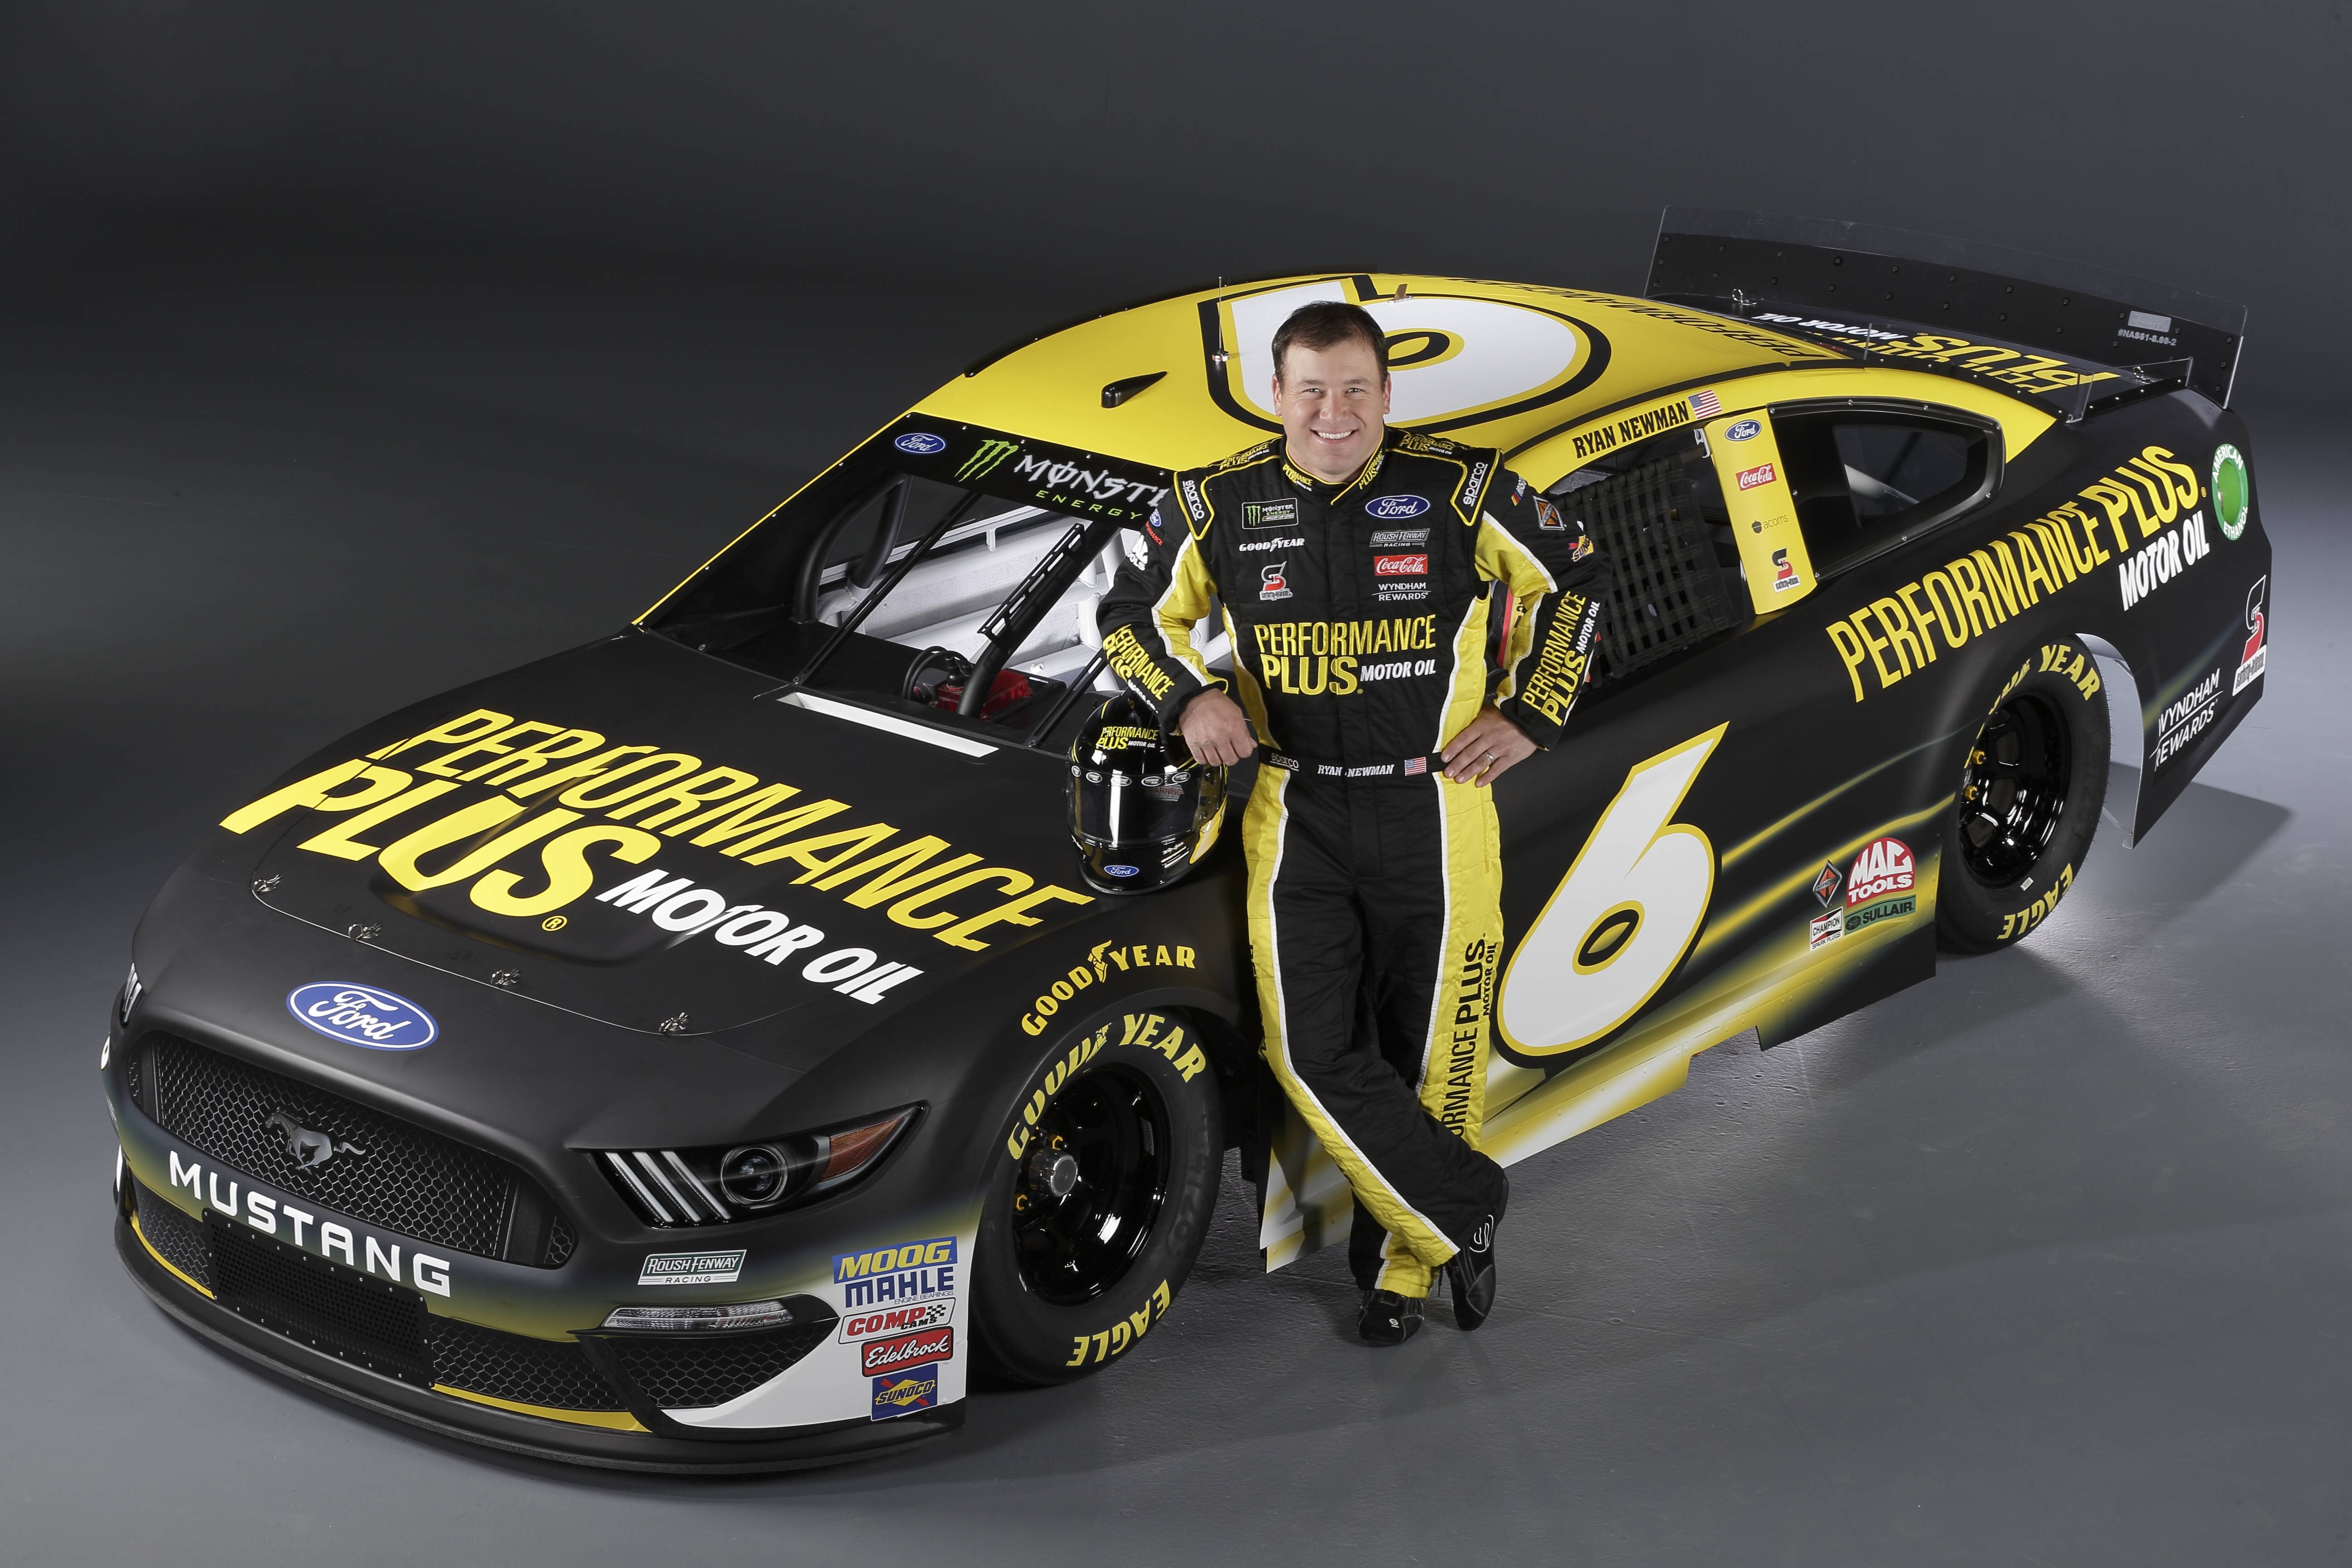 Motor Black and Yellow Logo - Newman to Sport Performance Plus Motor Oil Black and Yellow in 2019 |